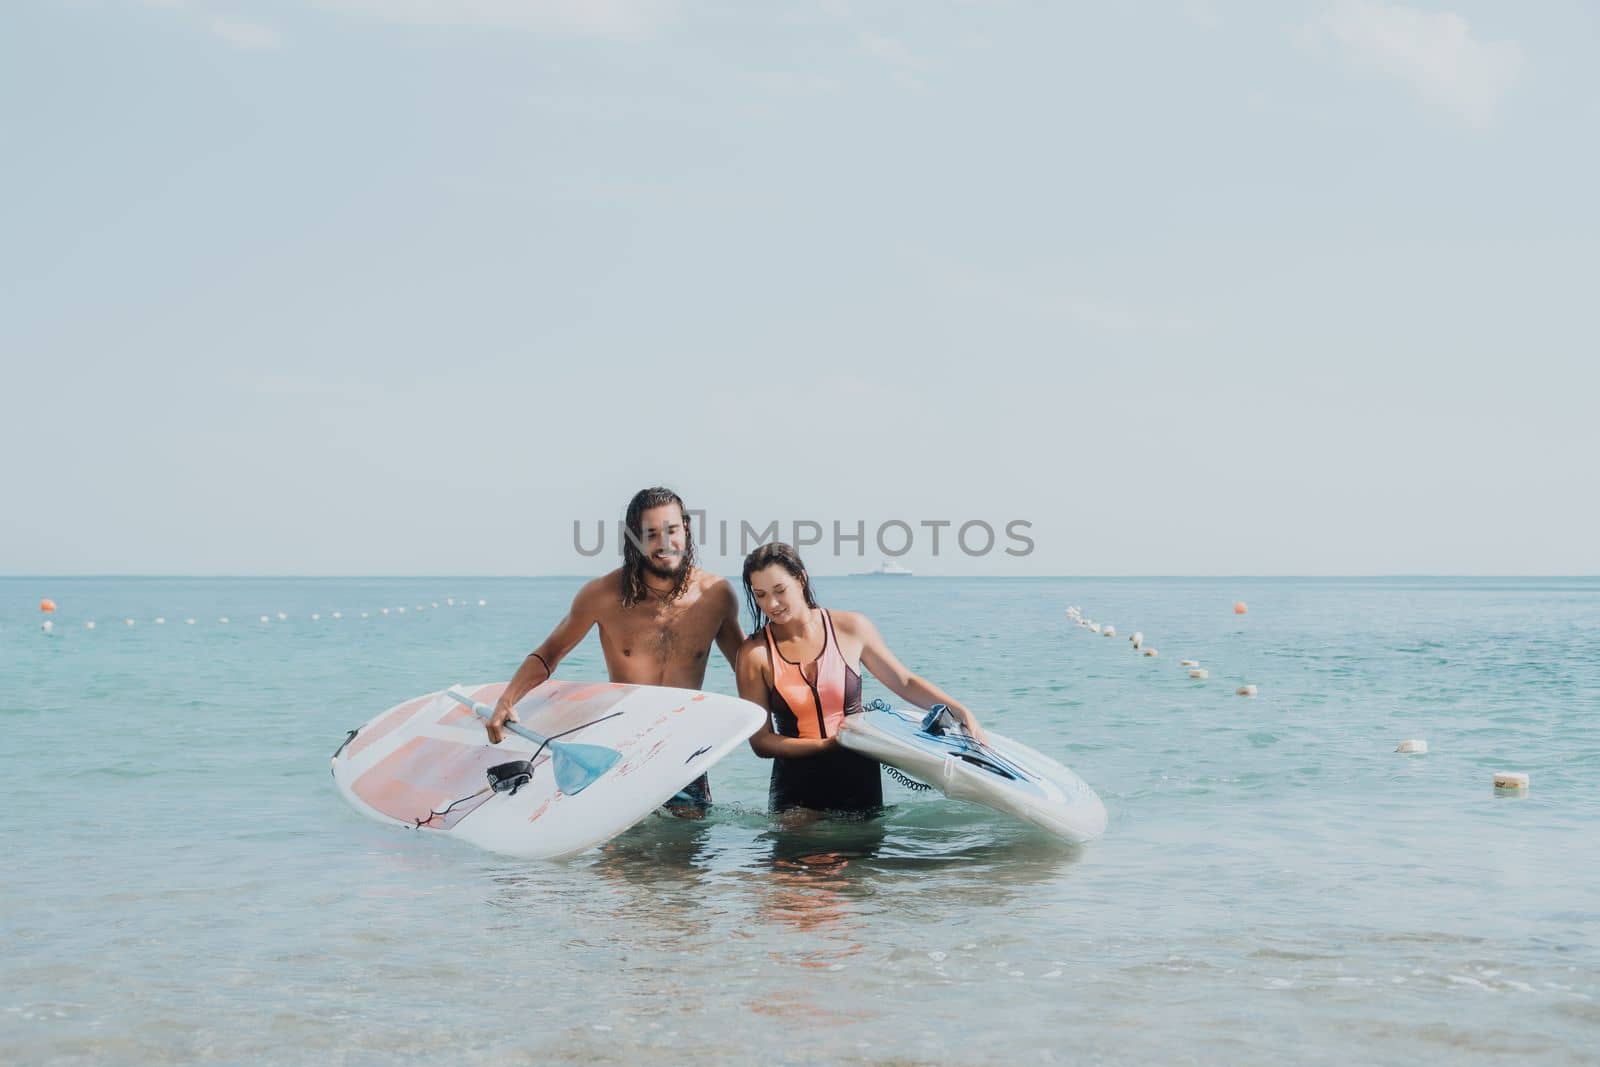 Woman man sea sup. Close up portrait of beautiful young caucasian woman with black hair and freckles looking at camera and smiling. Cute woman portrait in a pink bikini posing on sup board in the sea